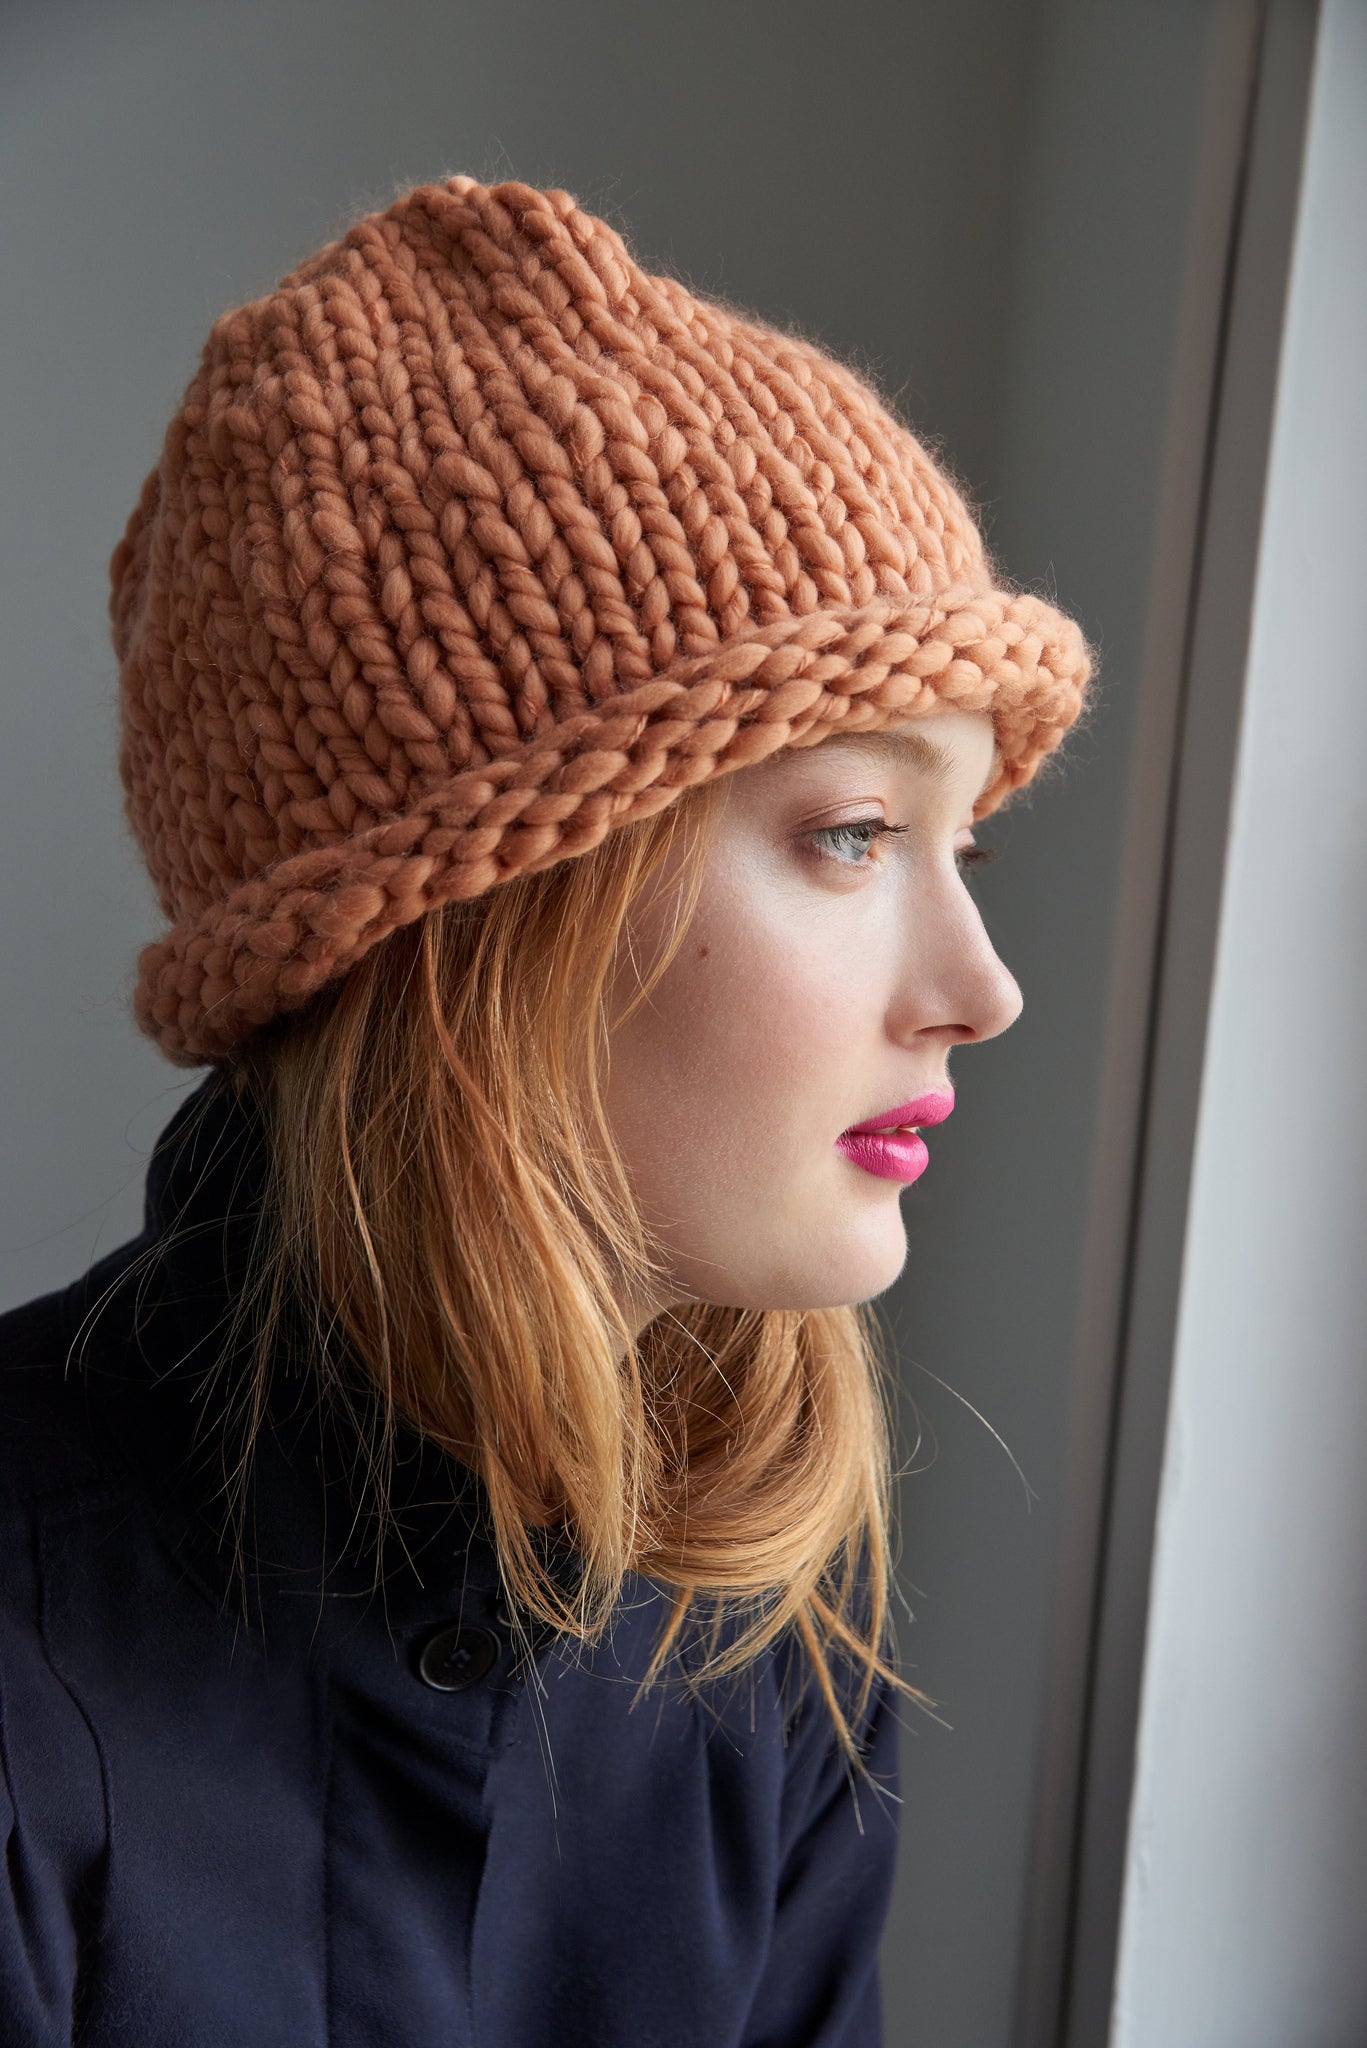 FREE My First Hat AND My First Scarf PATTERNS - Merino No. 5